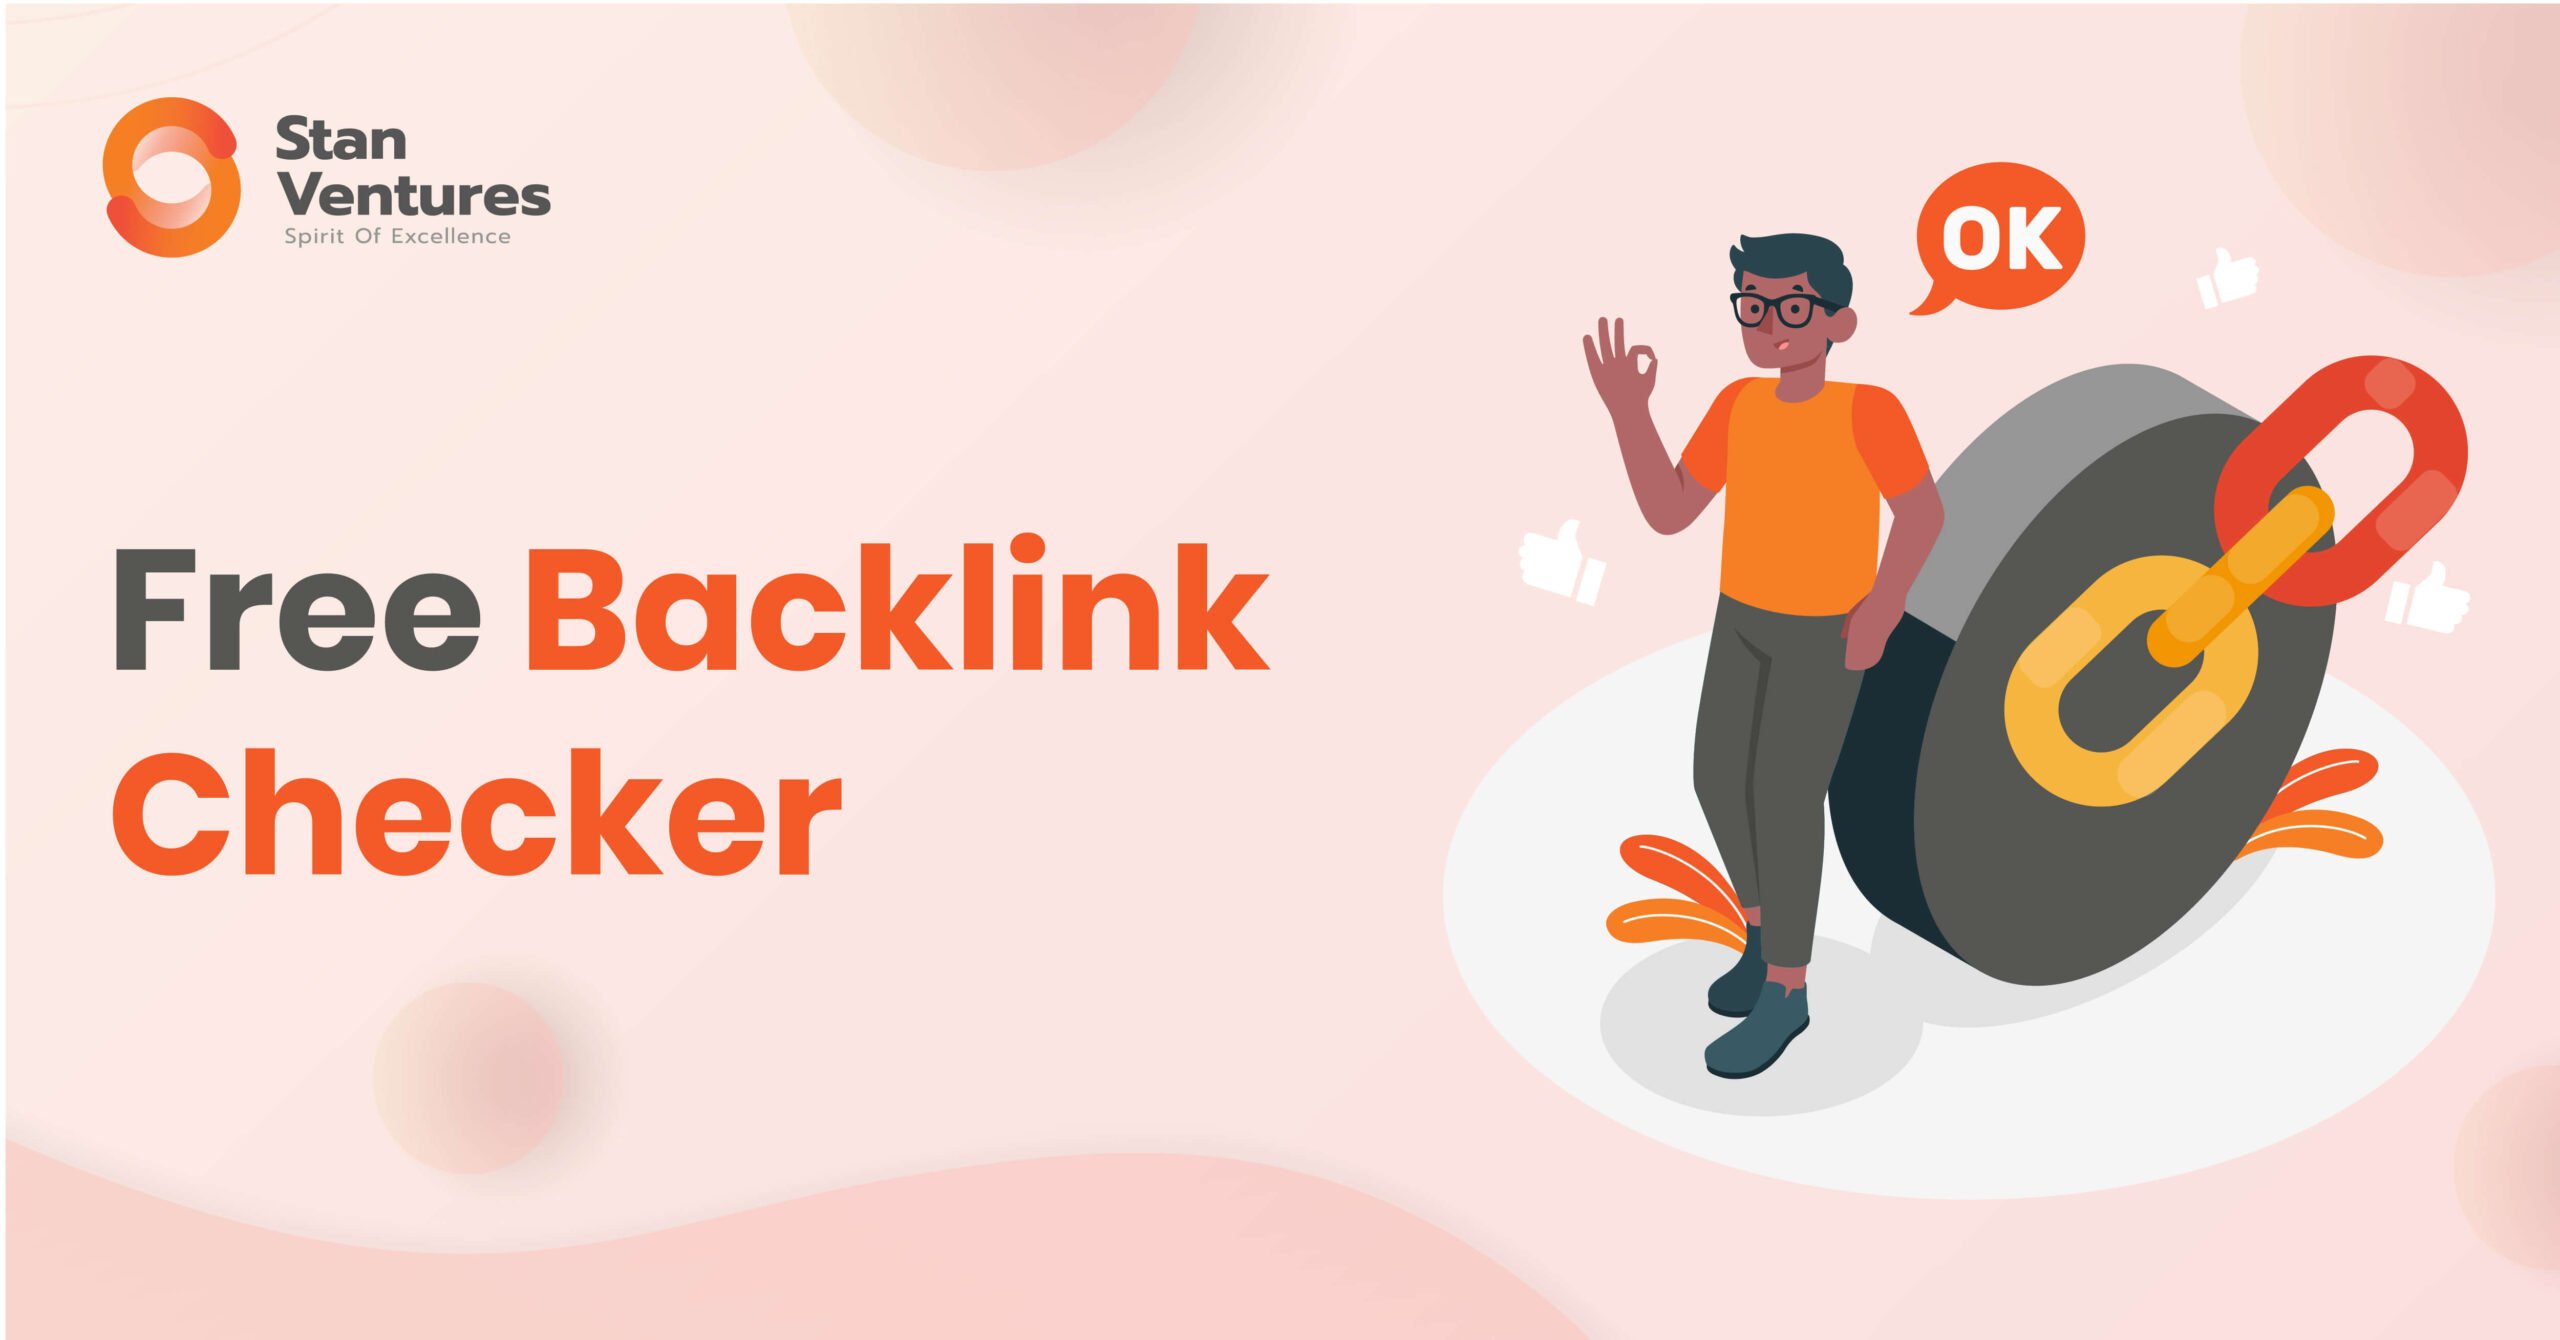 Advantages of Using a Backlink Checker Tool For Freeand Boost Your Site’s Rankings